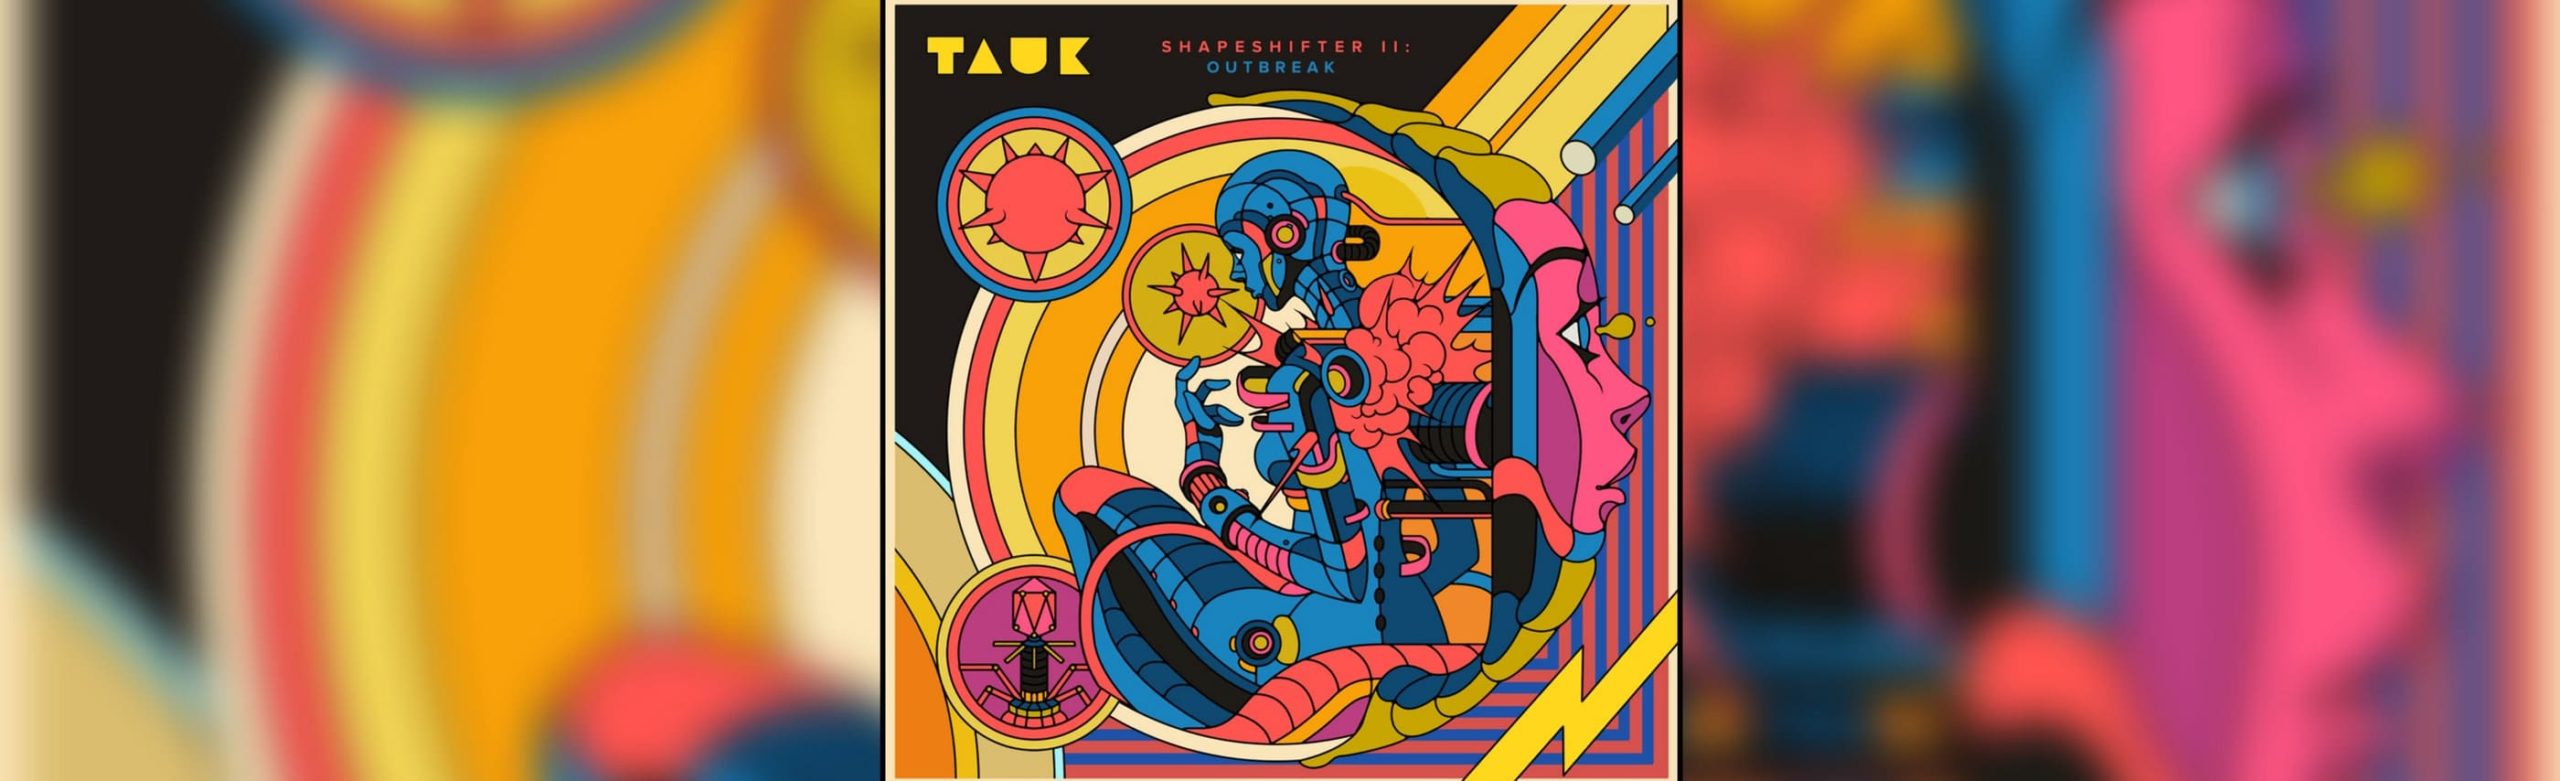 Tauk Unveils Shapeshifter II: Outbreak and Debuts Sci Fi Video for “Recreational Outrage” Image